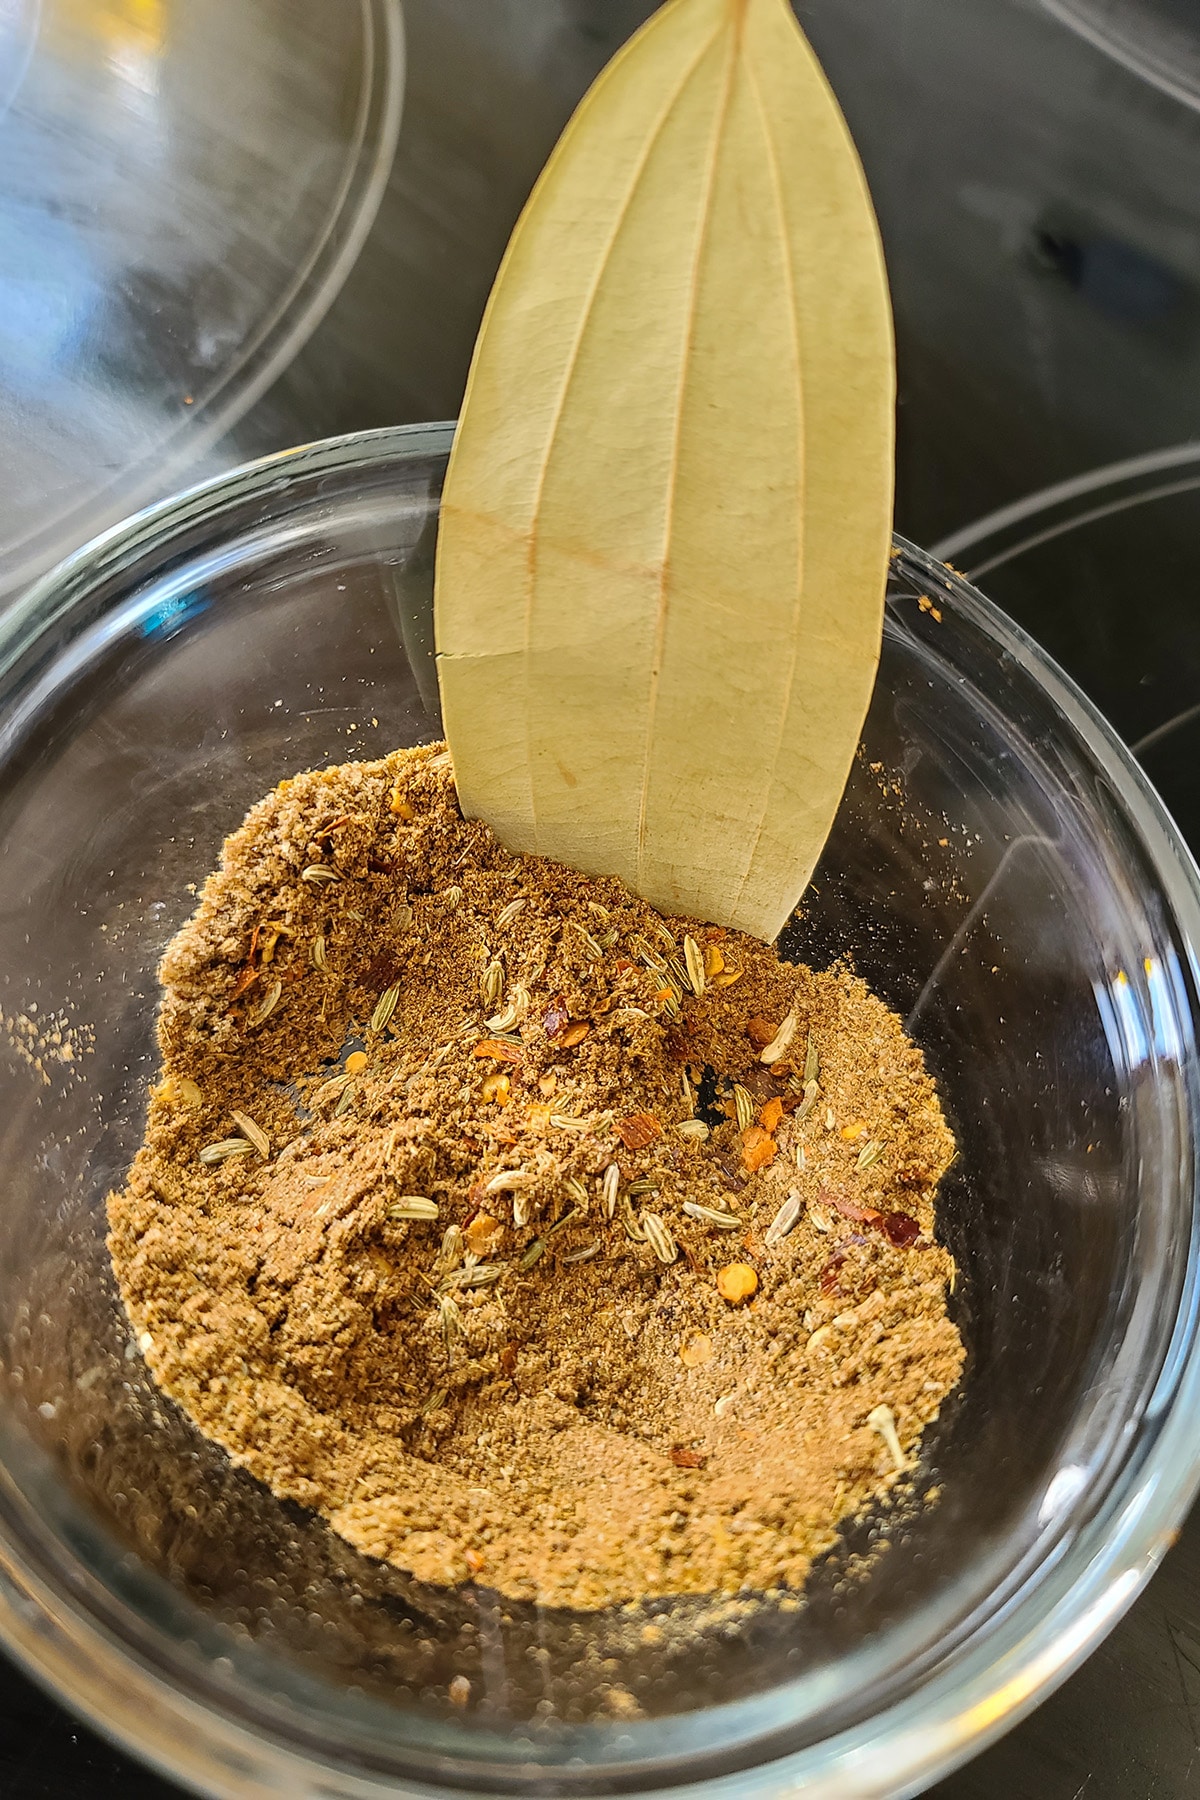 A small bowl of spices with a bay leaf sticking out of it.